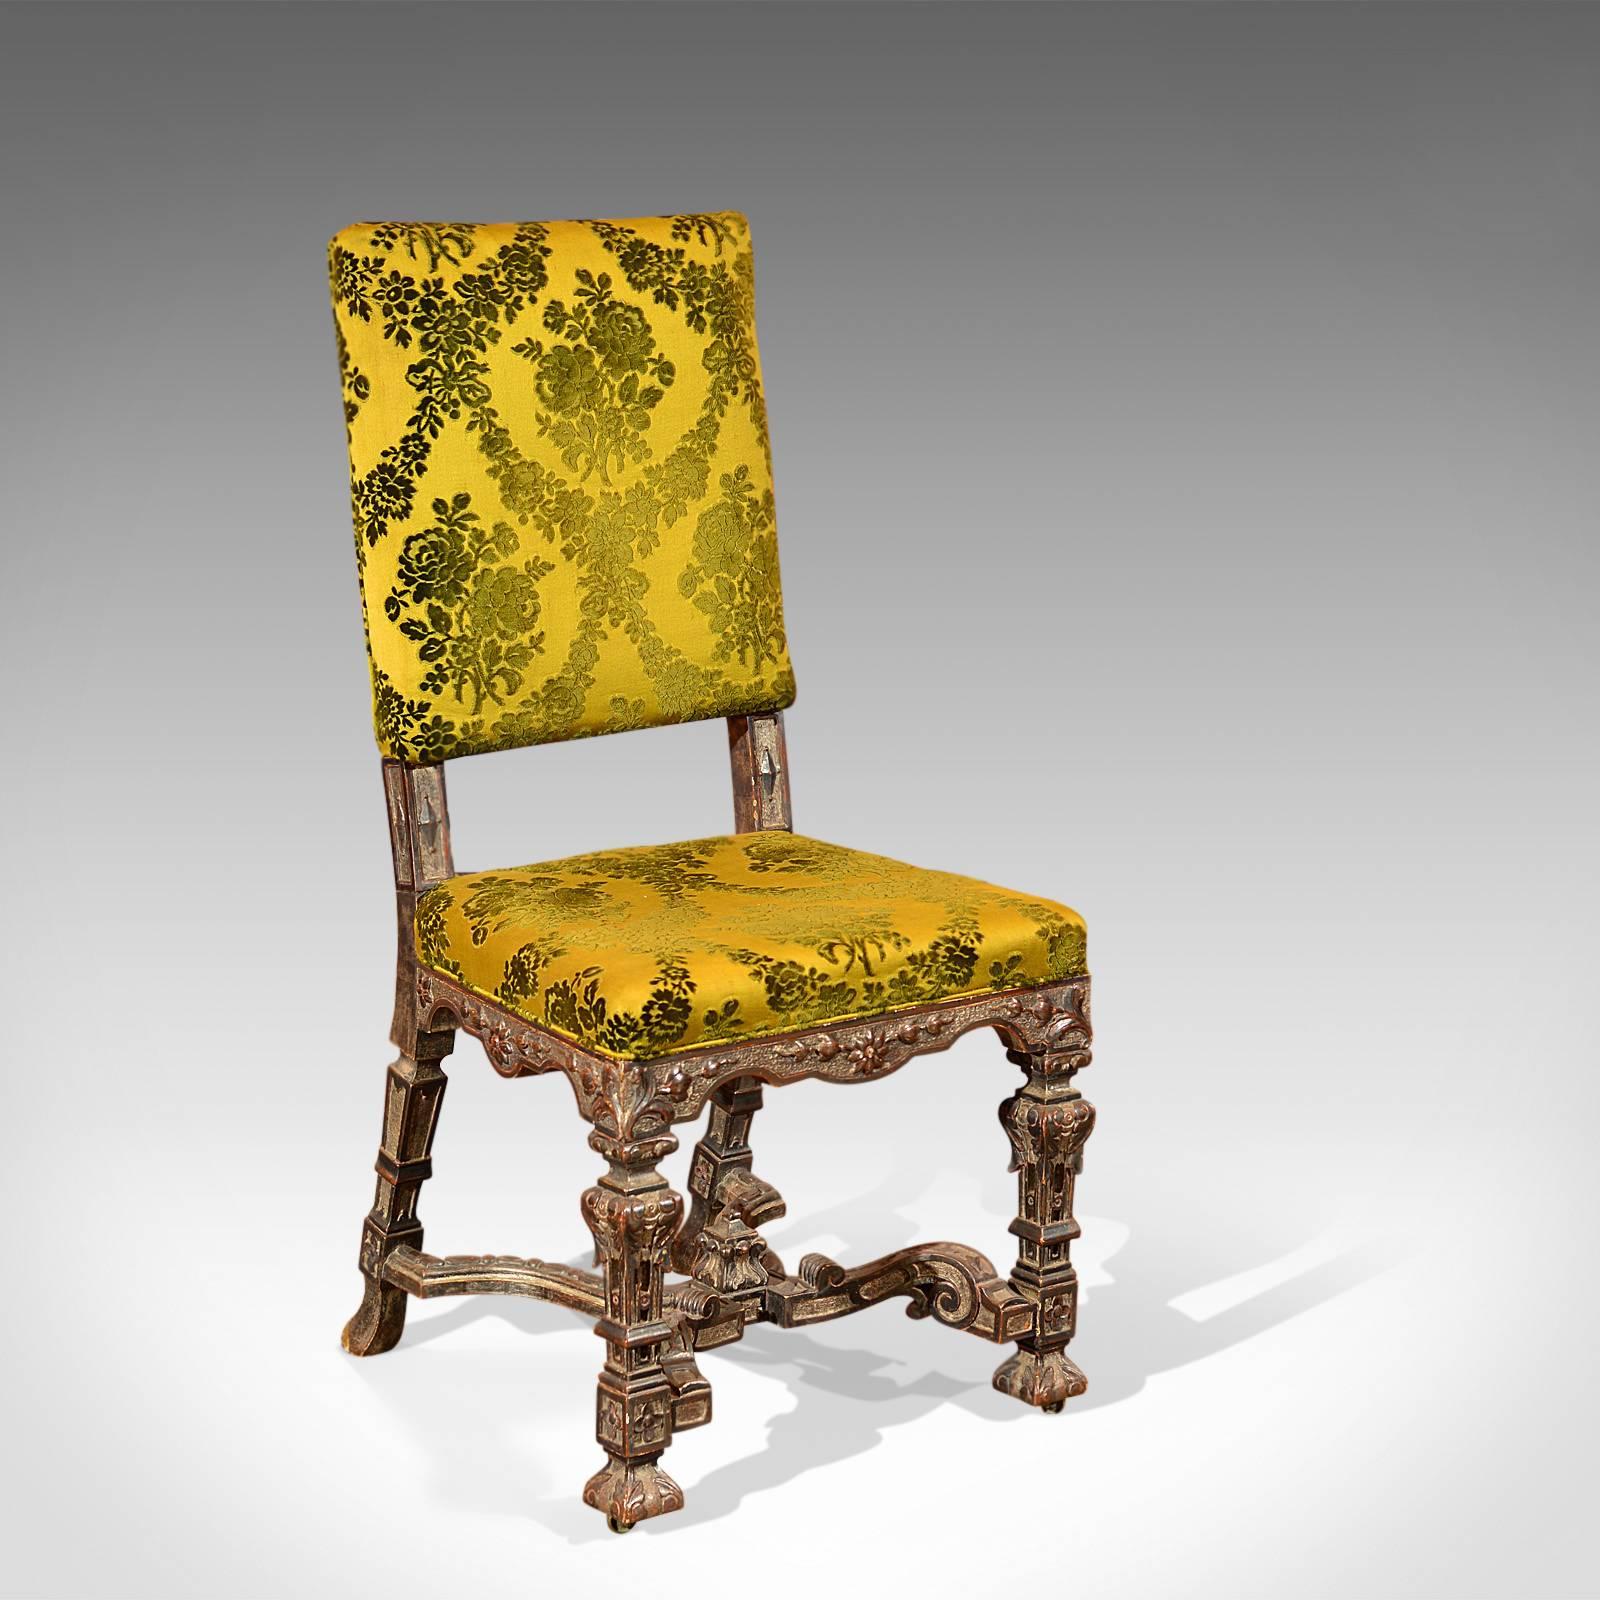 This is an antique, French side chair dating to circa 1900.

The heavily carved frame displays Gothic overtones in the serpentine seat rails, square section baluster legs and extravagant 'X' frame stretcher topped with inverted carved finial. The